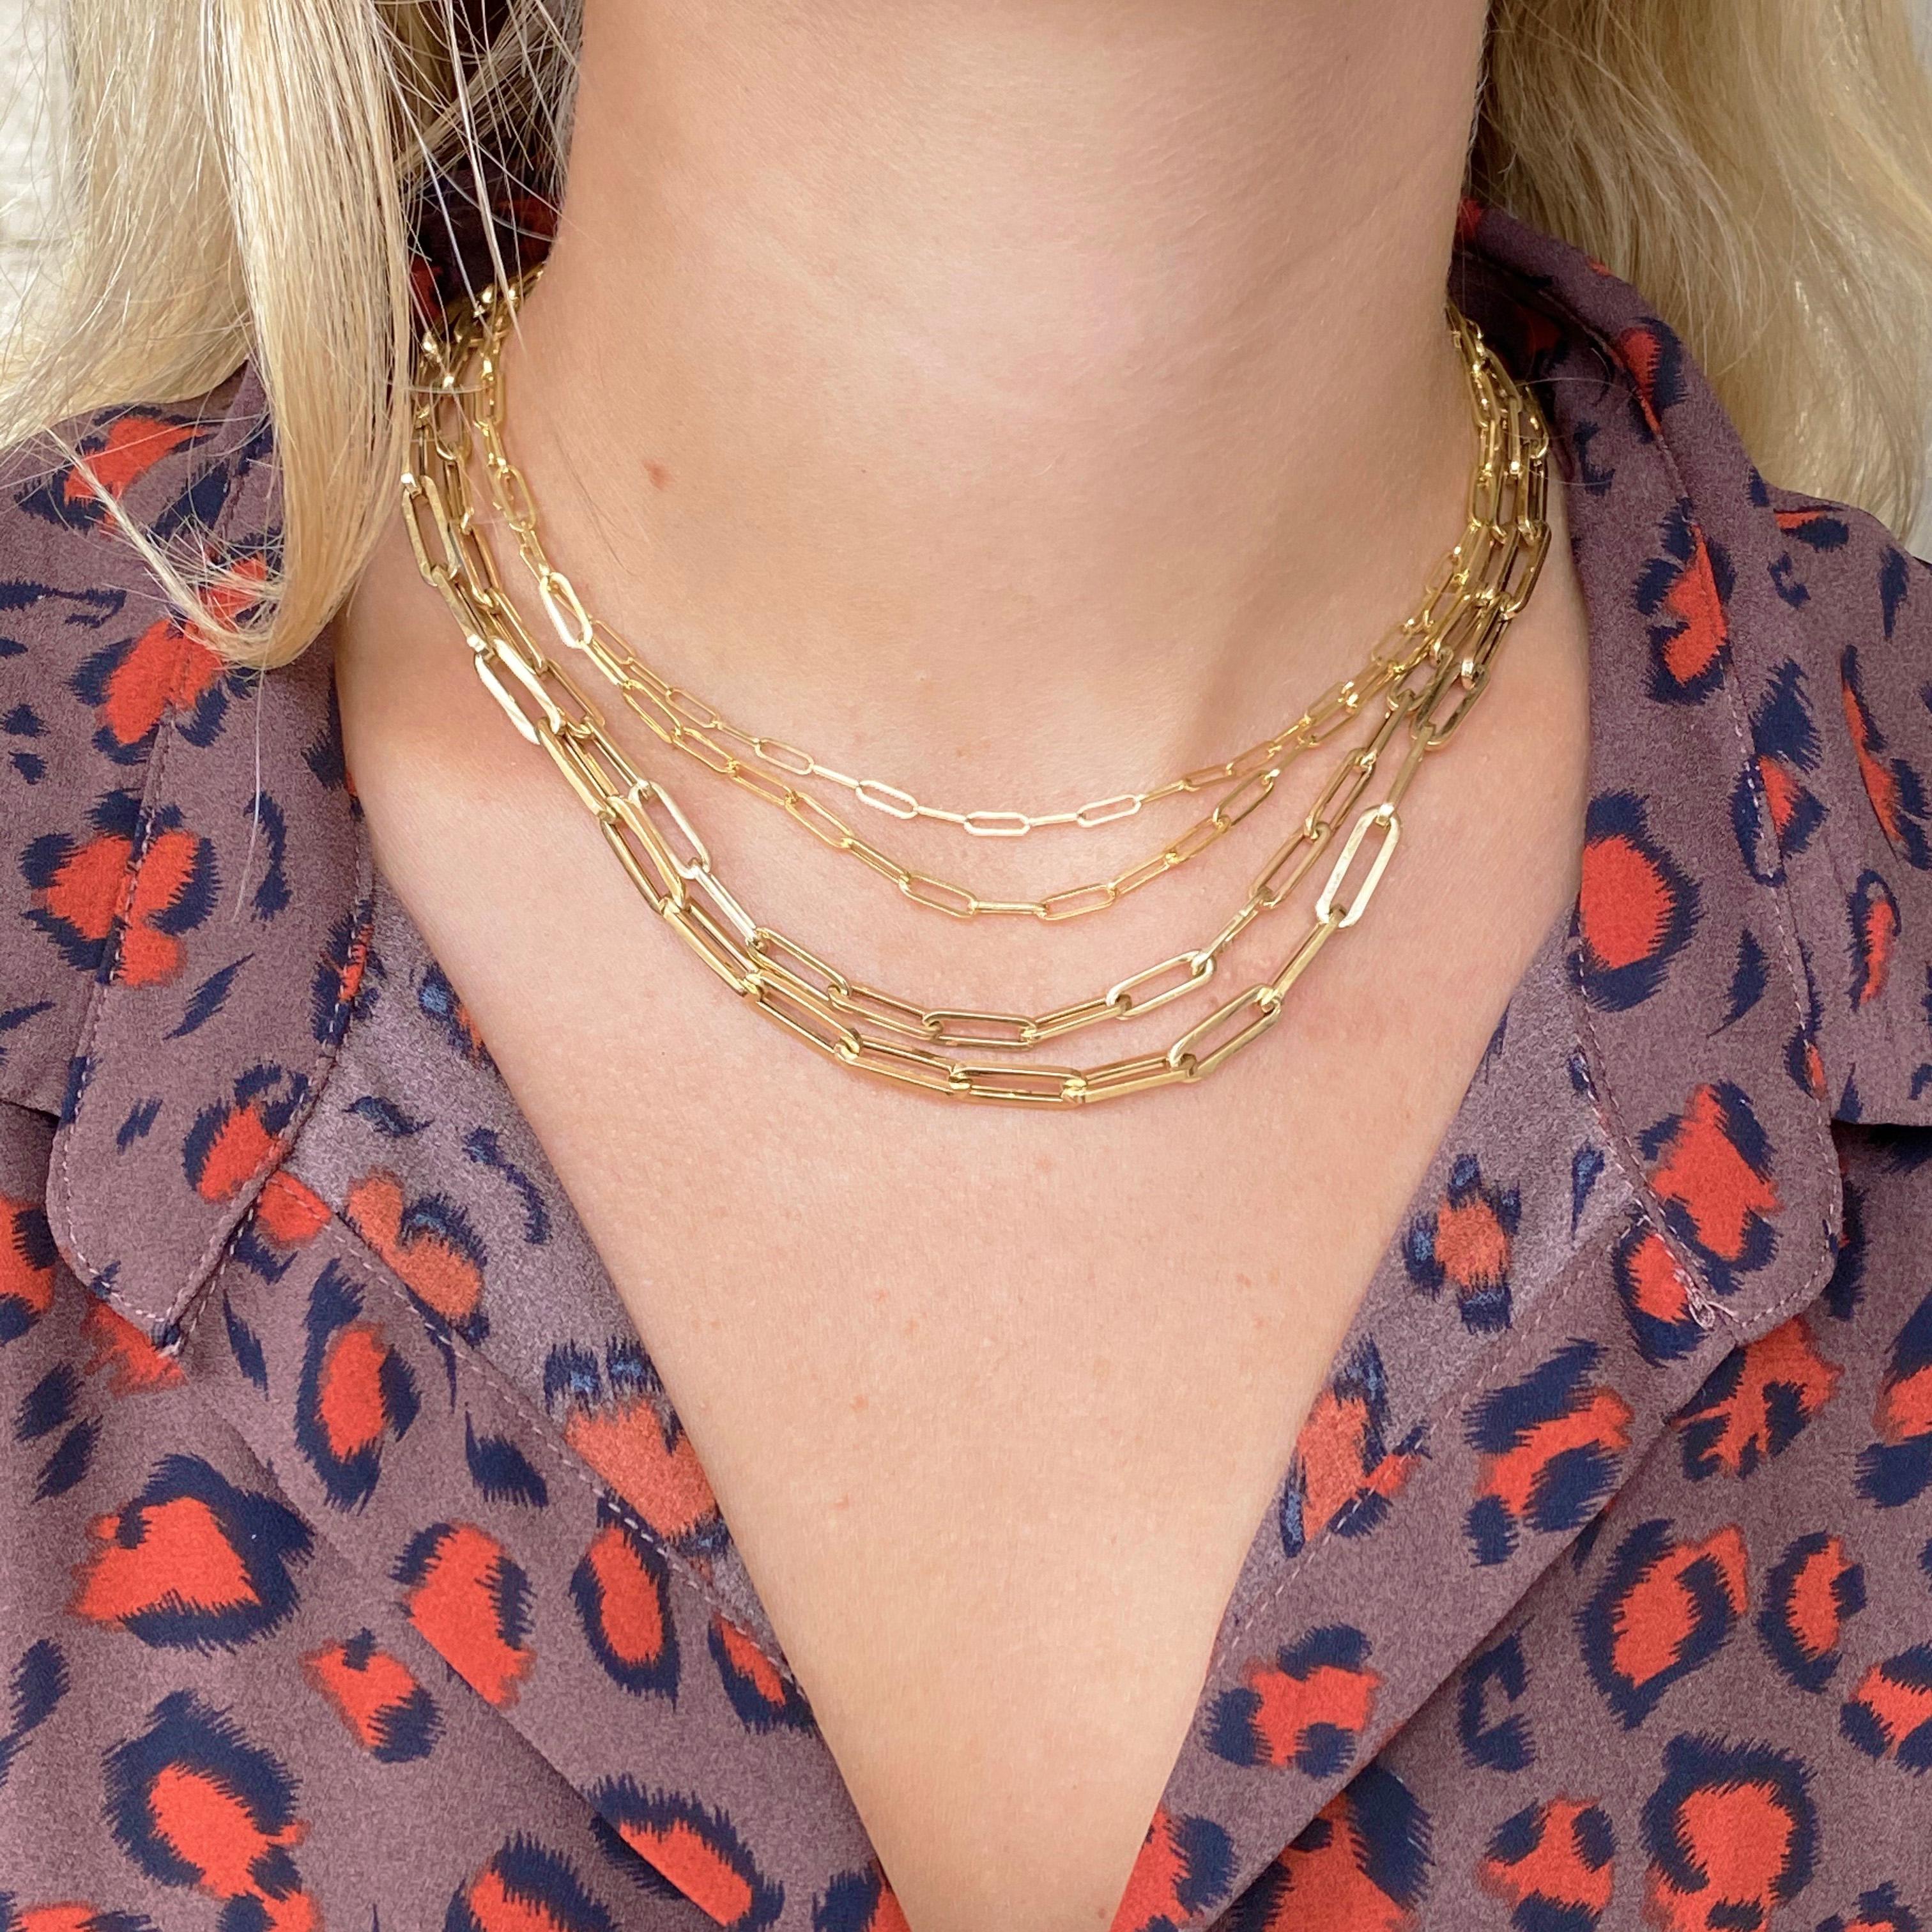 Paperclip chains are fabulous for anyone! Wear this 14 karat gold chain by itself, with a charm, or layer it with any chains you like for your own stylish and individual look!  This 18-inch chain is 2.5 mm wide.
 
To see if this fabulous chain is